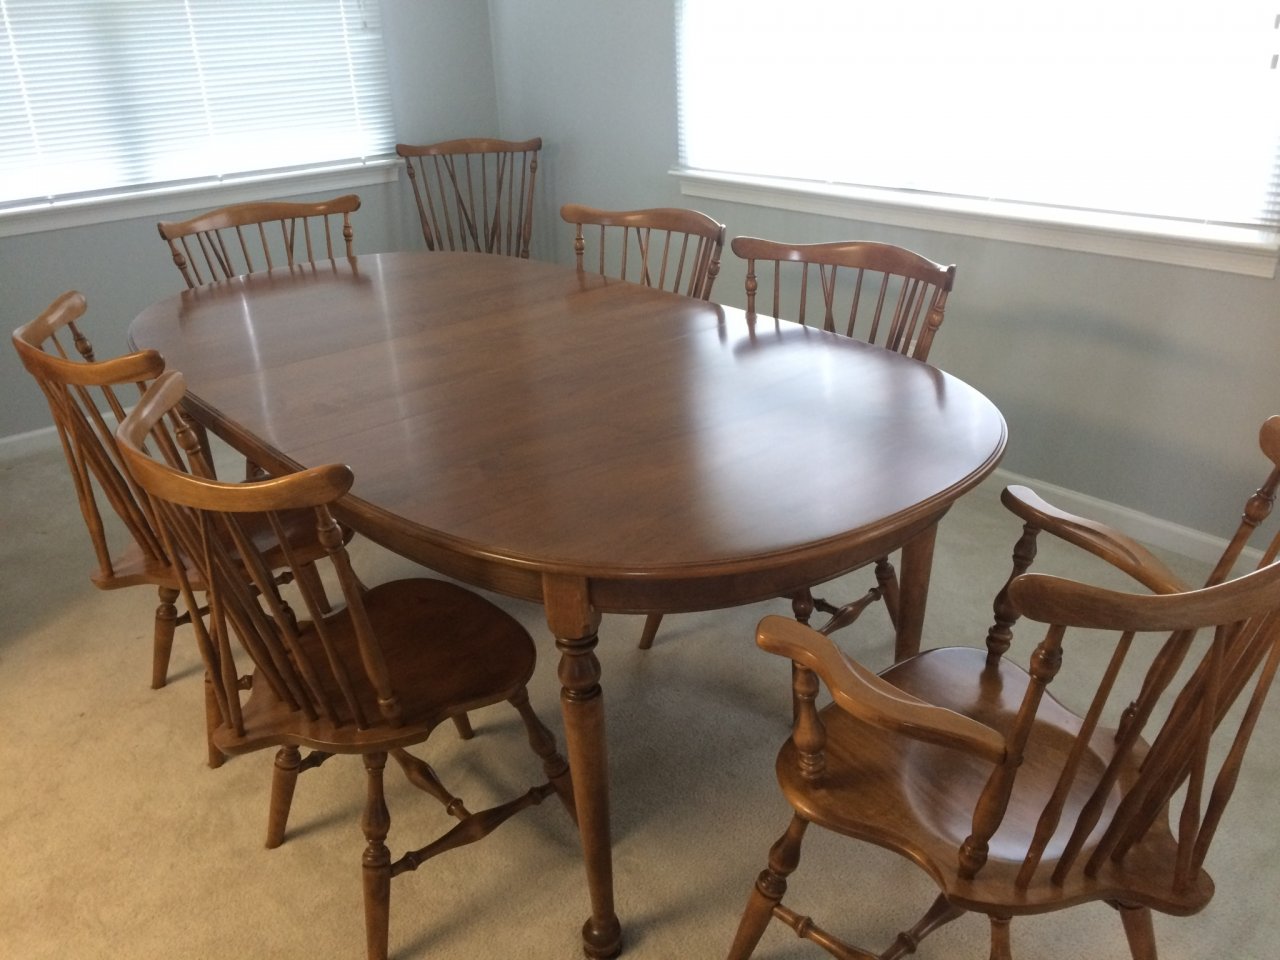 Ethan Allen Dining Room Set | My Antique Furniture Collection